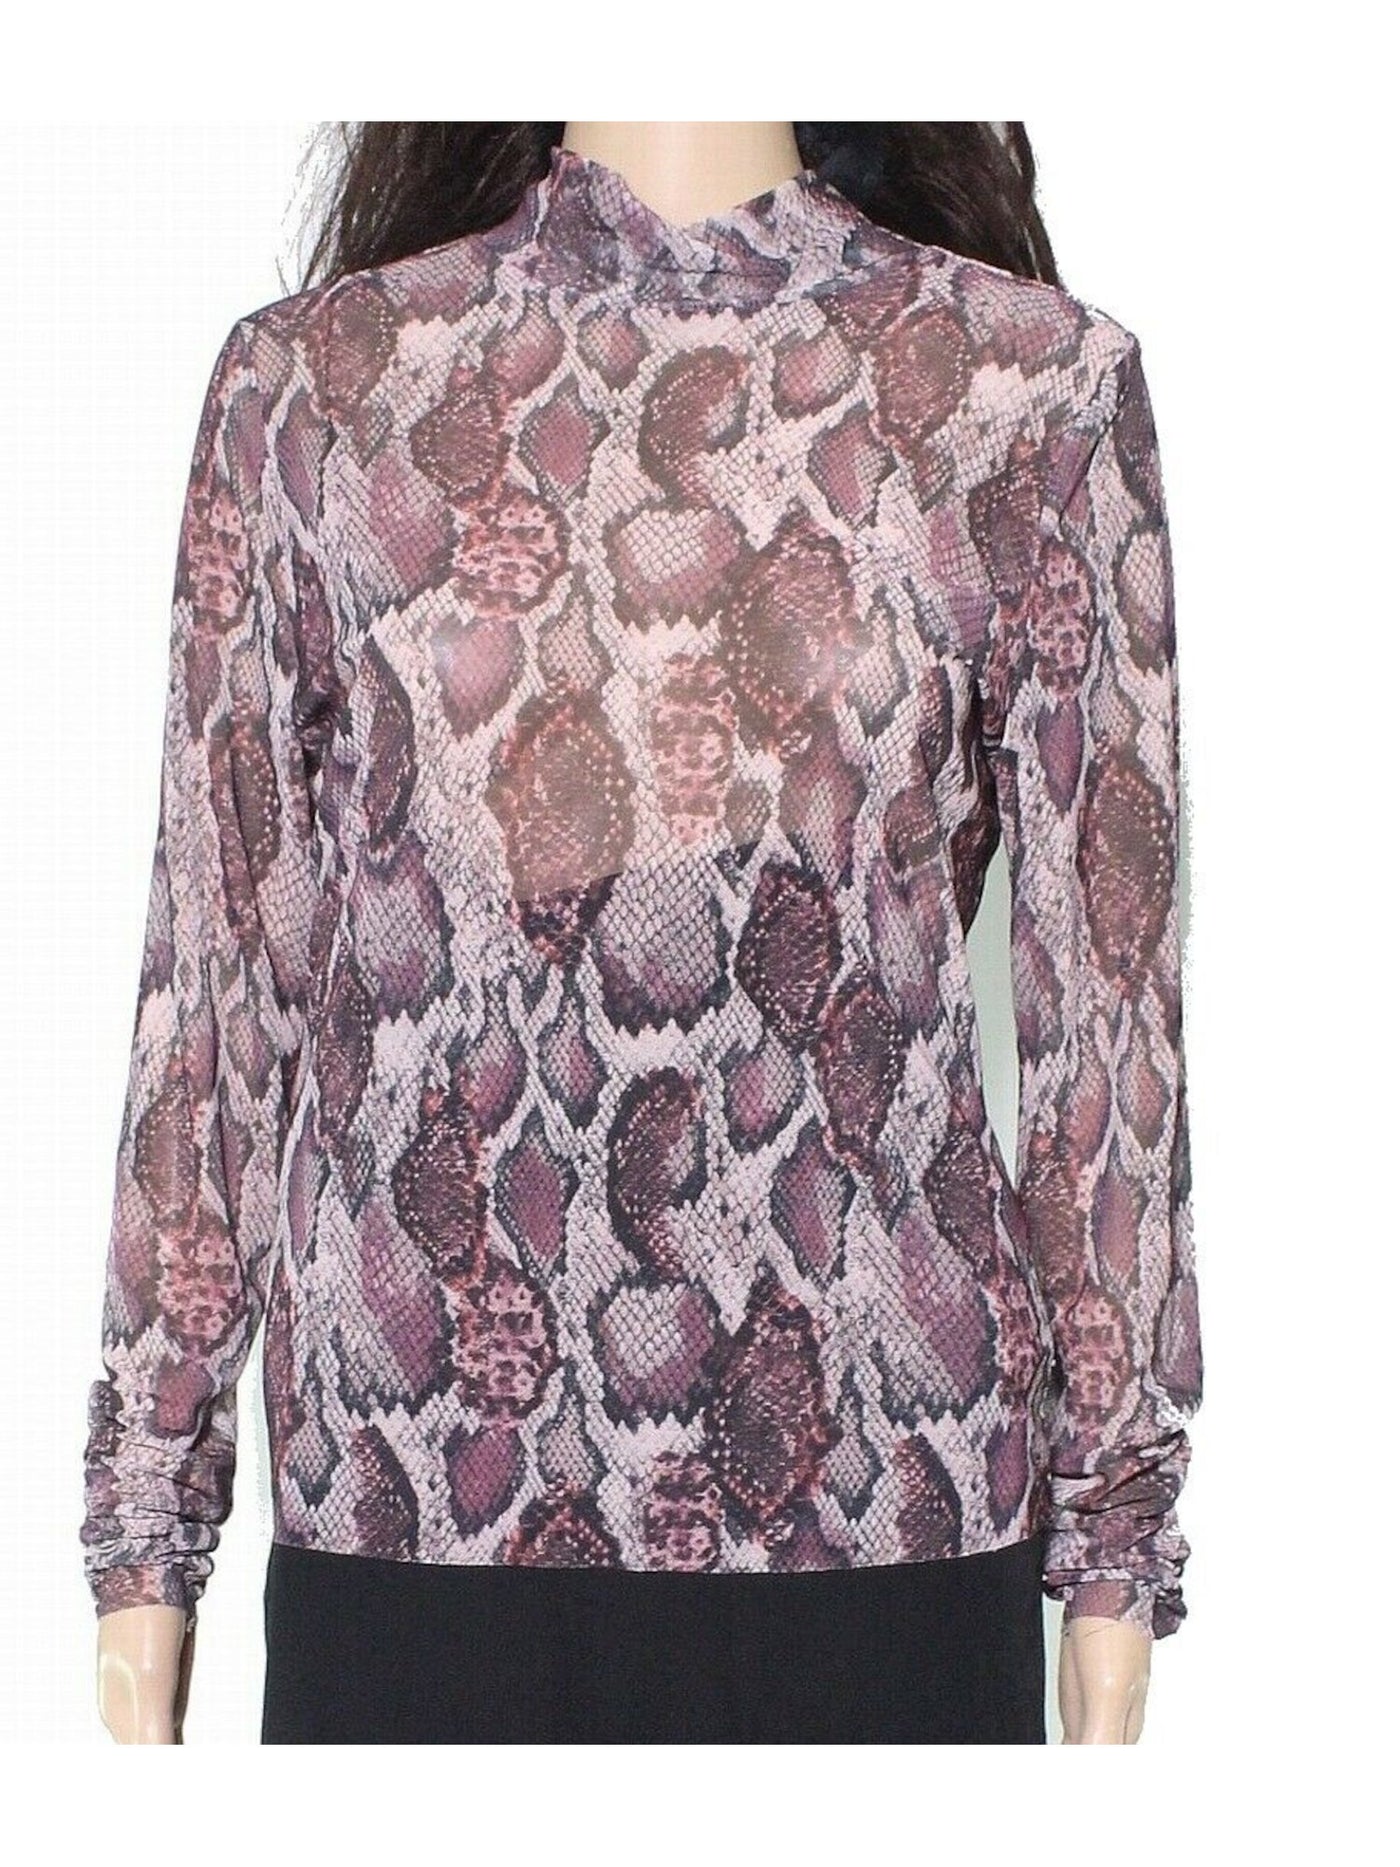 T.D.C. Womens Brown Fitted Sheer Animal Print Long Sleeve Mock Neck Top L